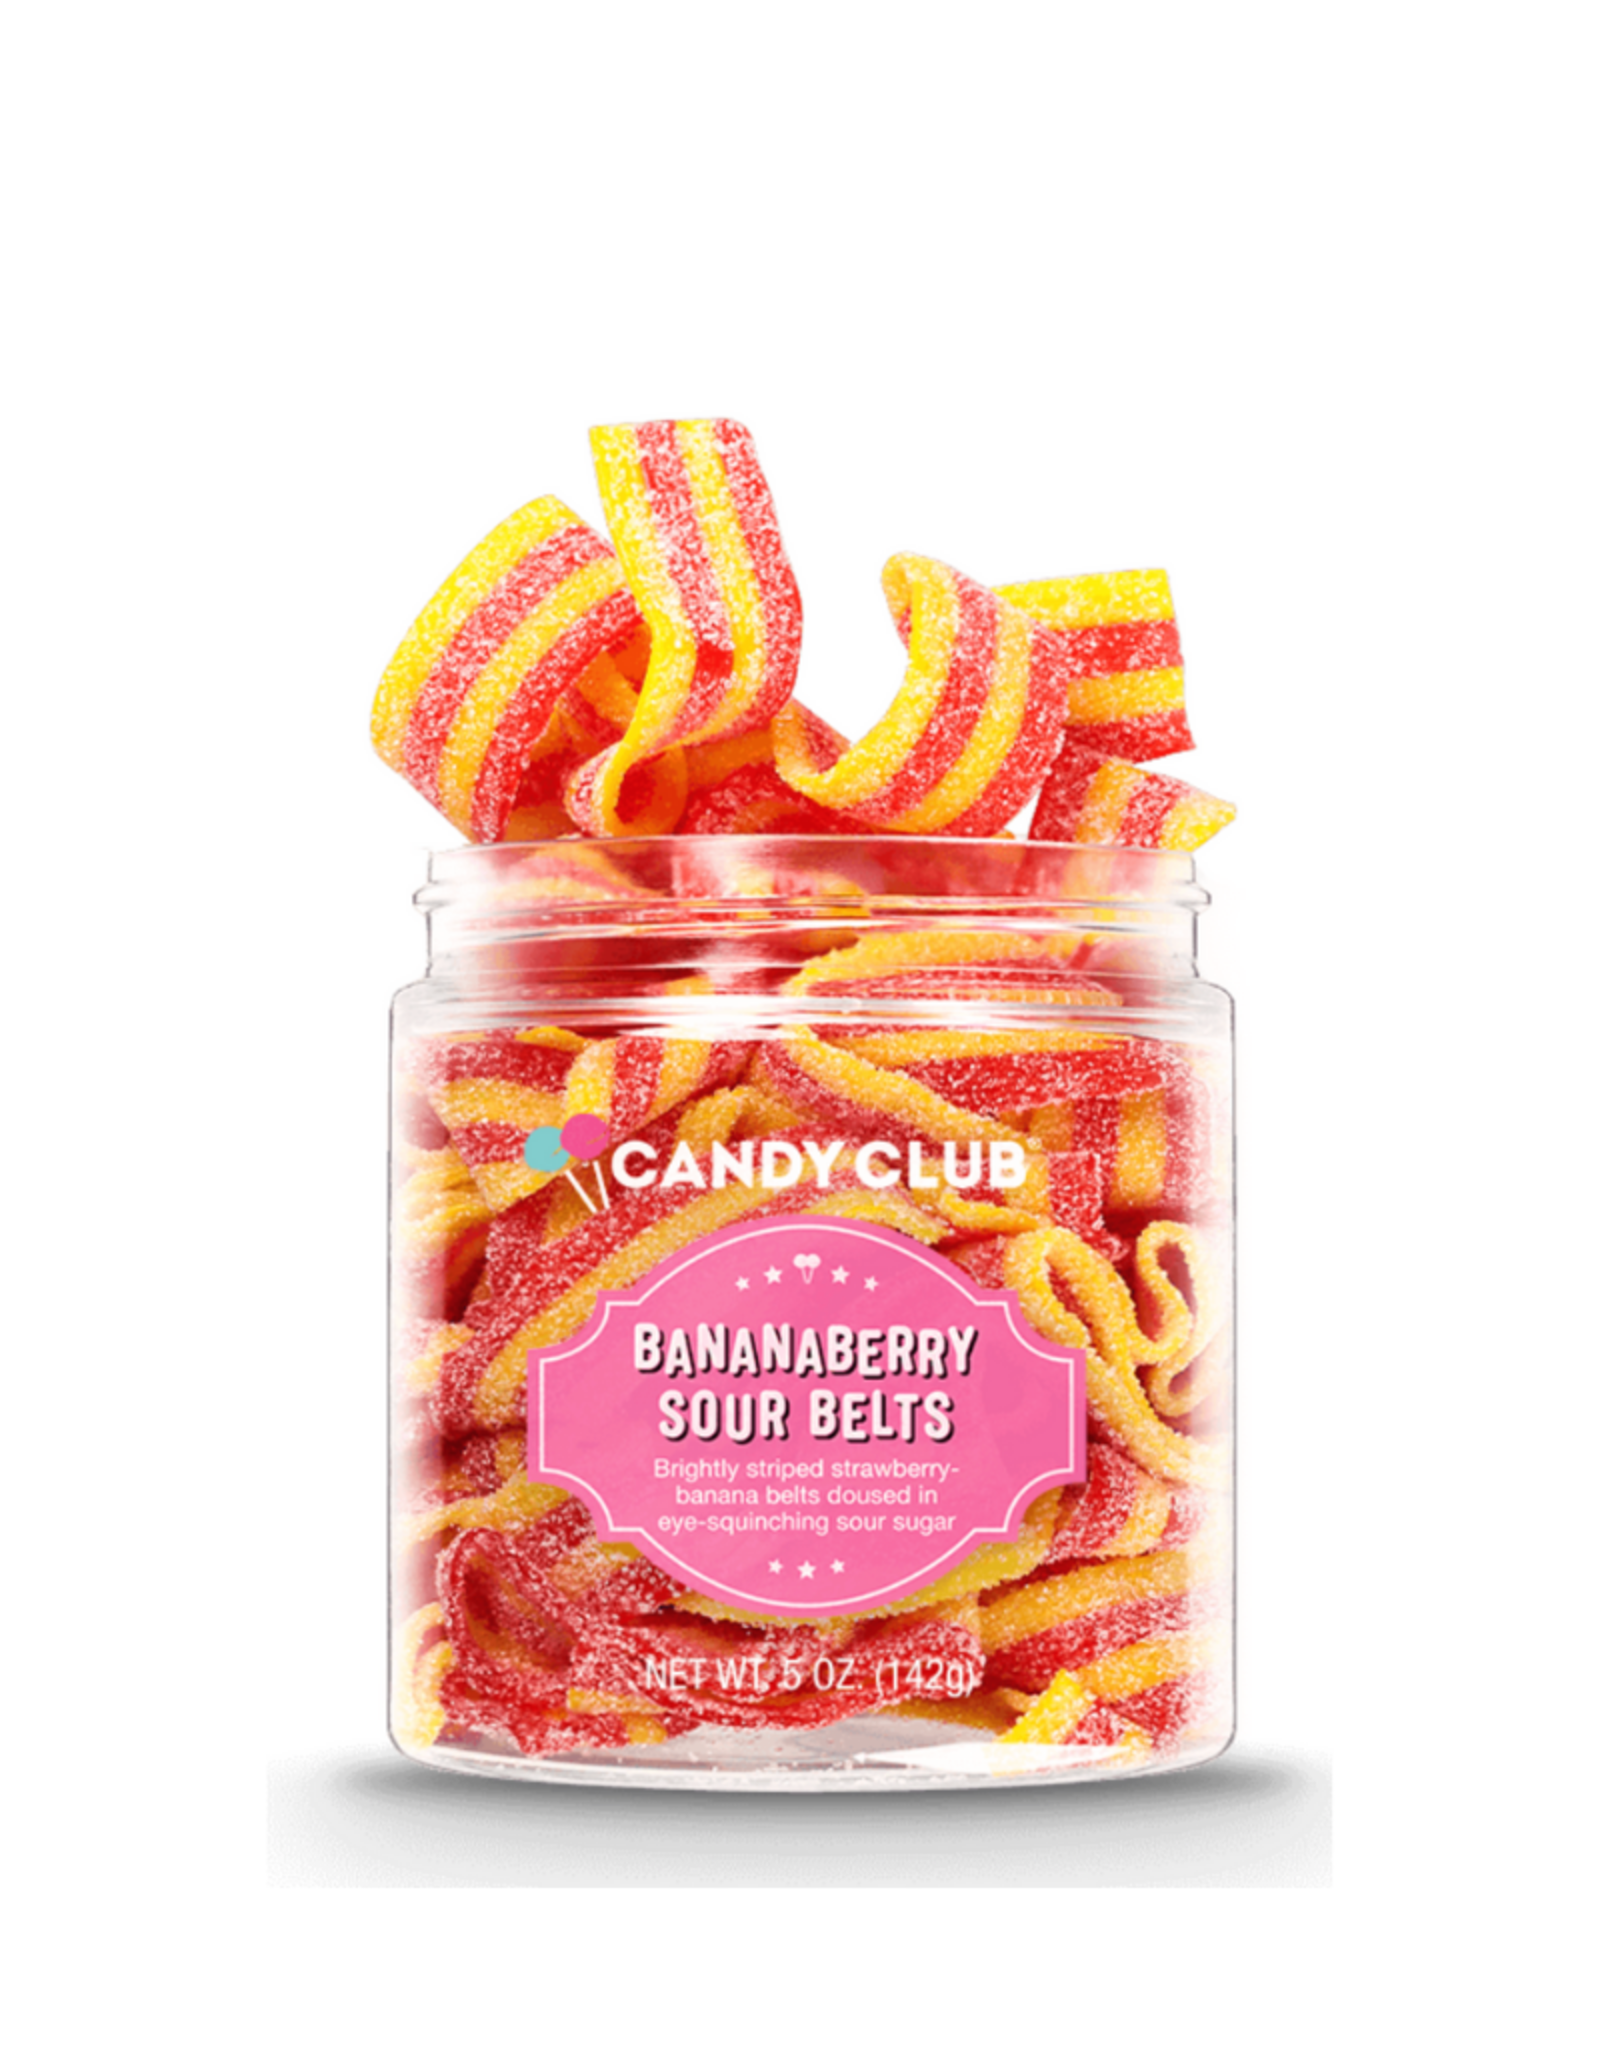 Bananaberry Sour Belts